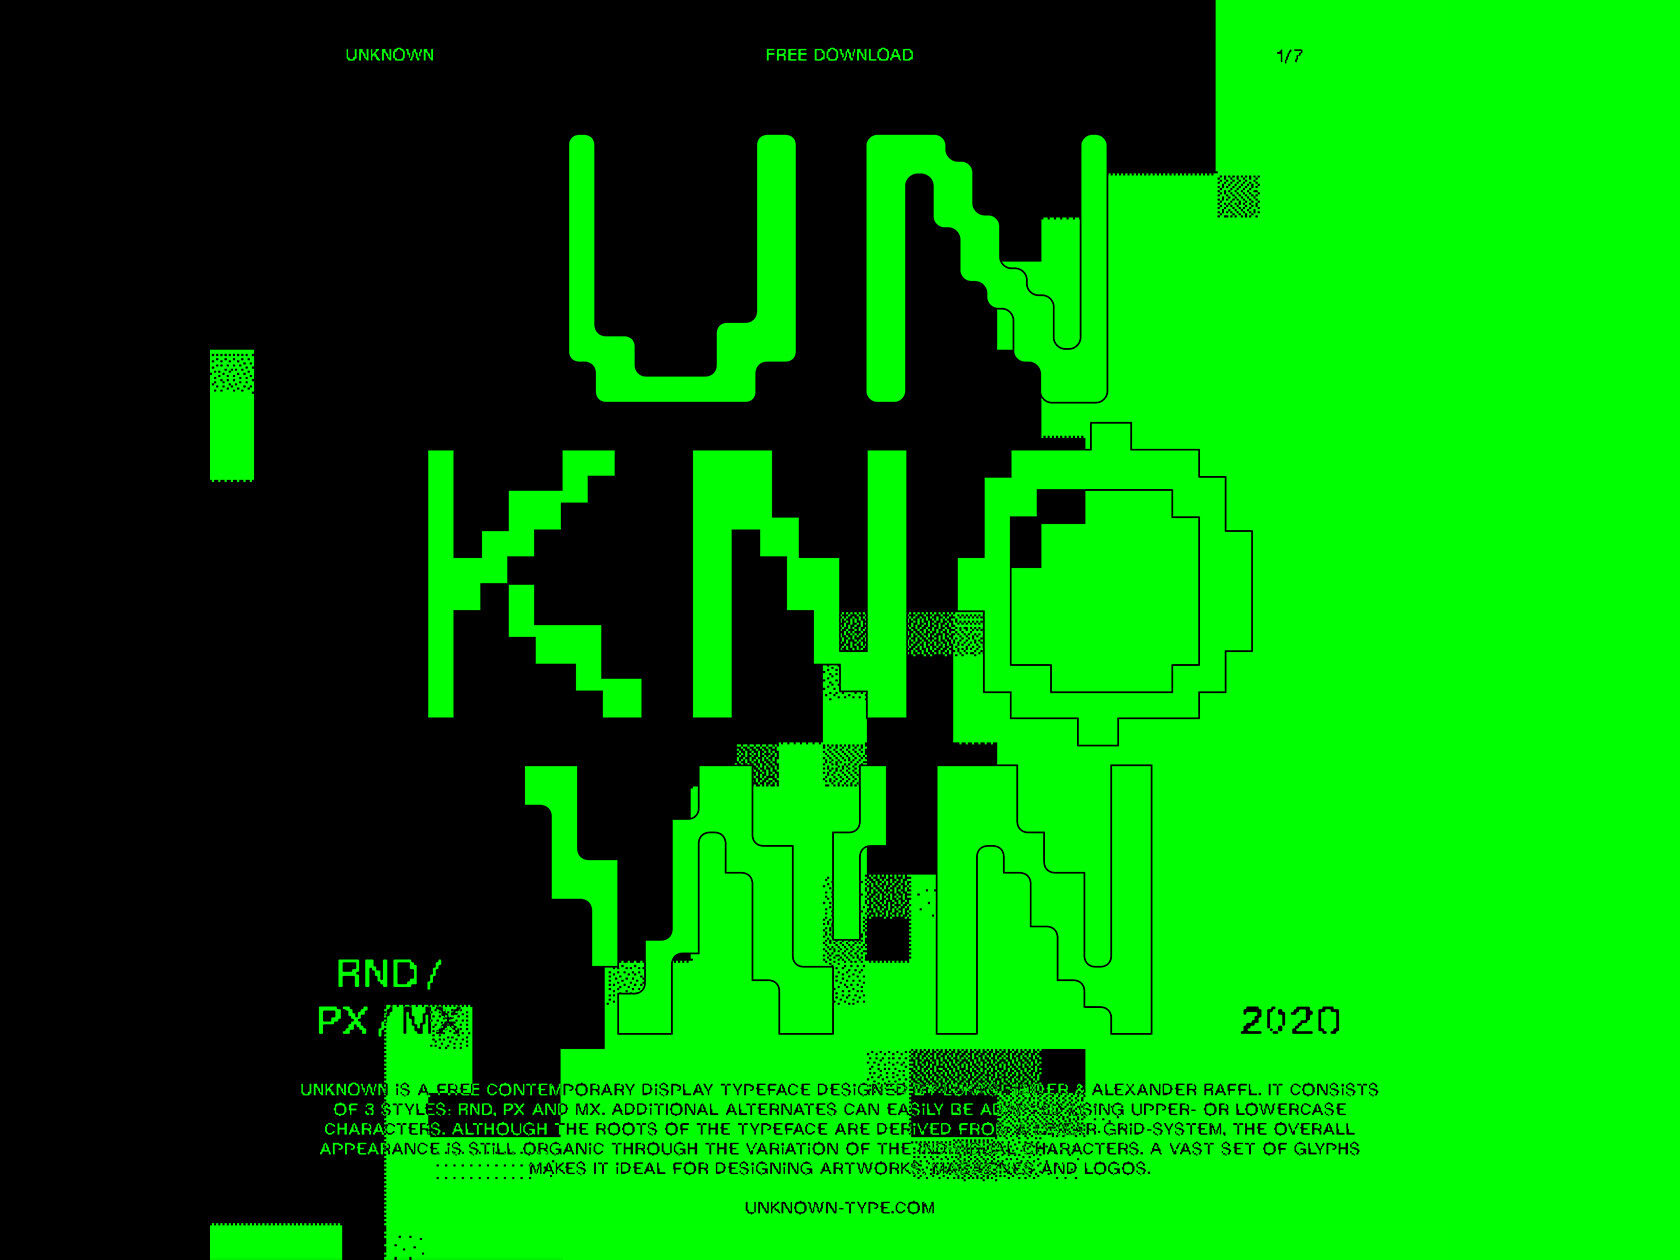 The new typeface “Unknown” by Alexander Raffl and Lukas Haider comes in three systematic, but experimental styles